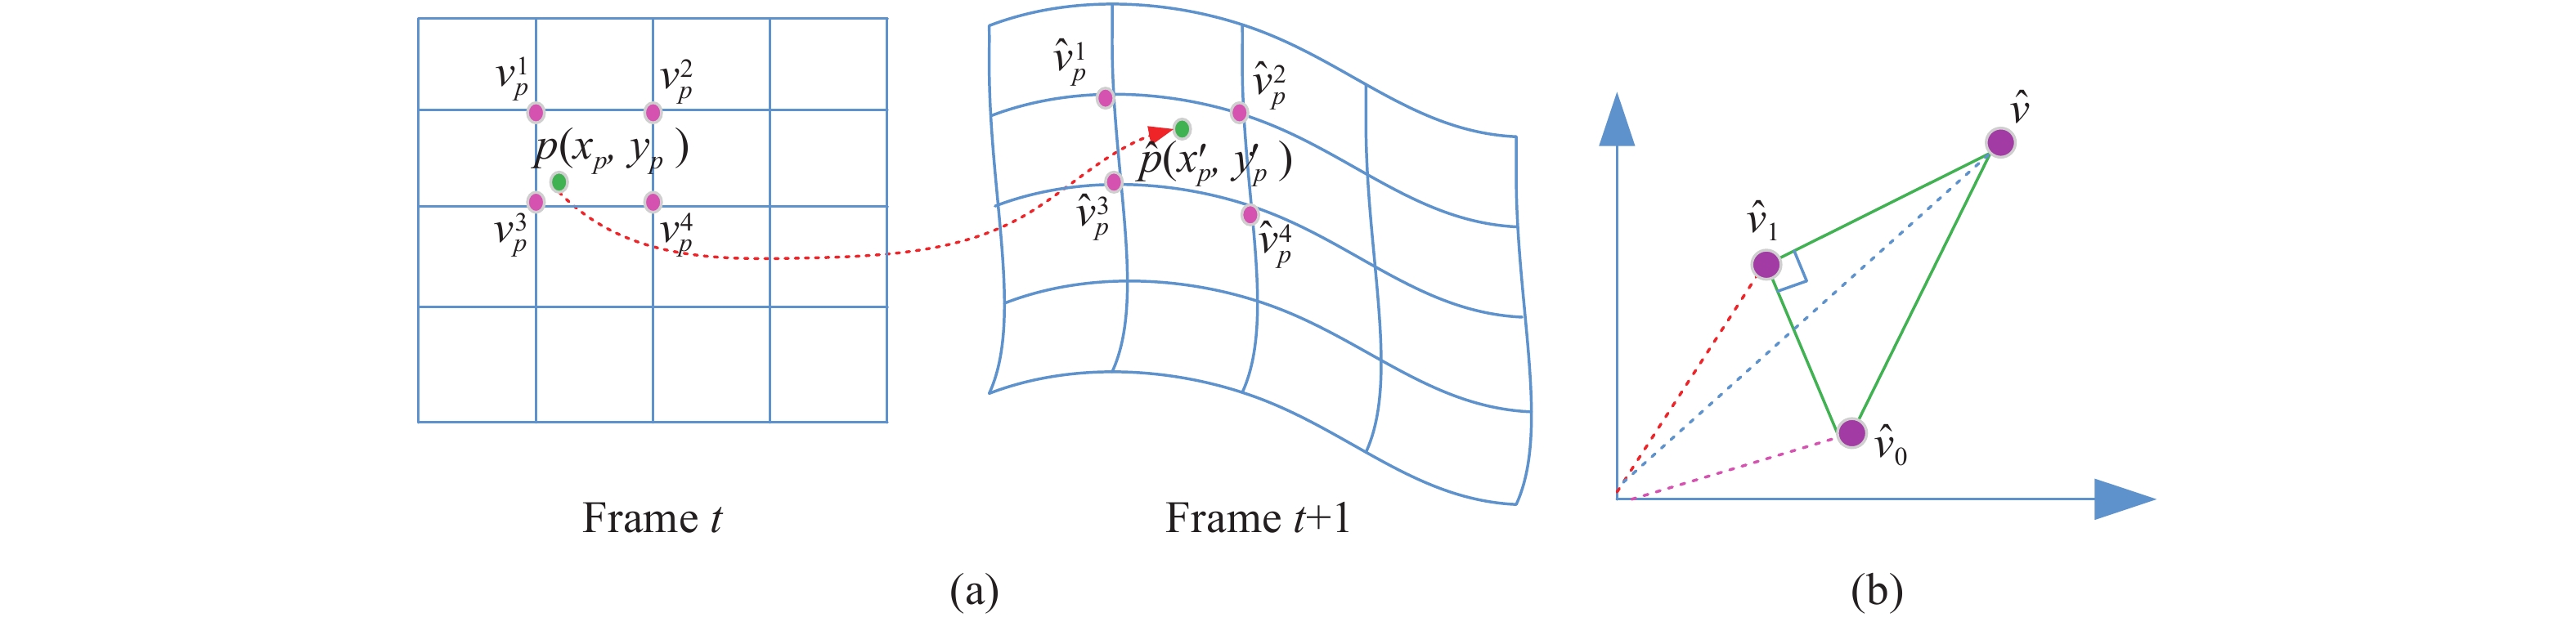 Motion model based on grid mapping. (a) Correspondence between two frames of image grids; (b) Shape retention constraints